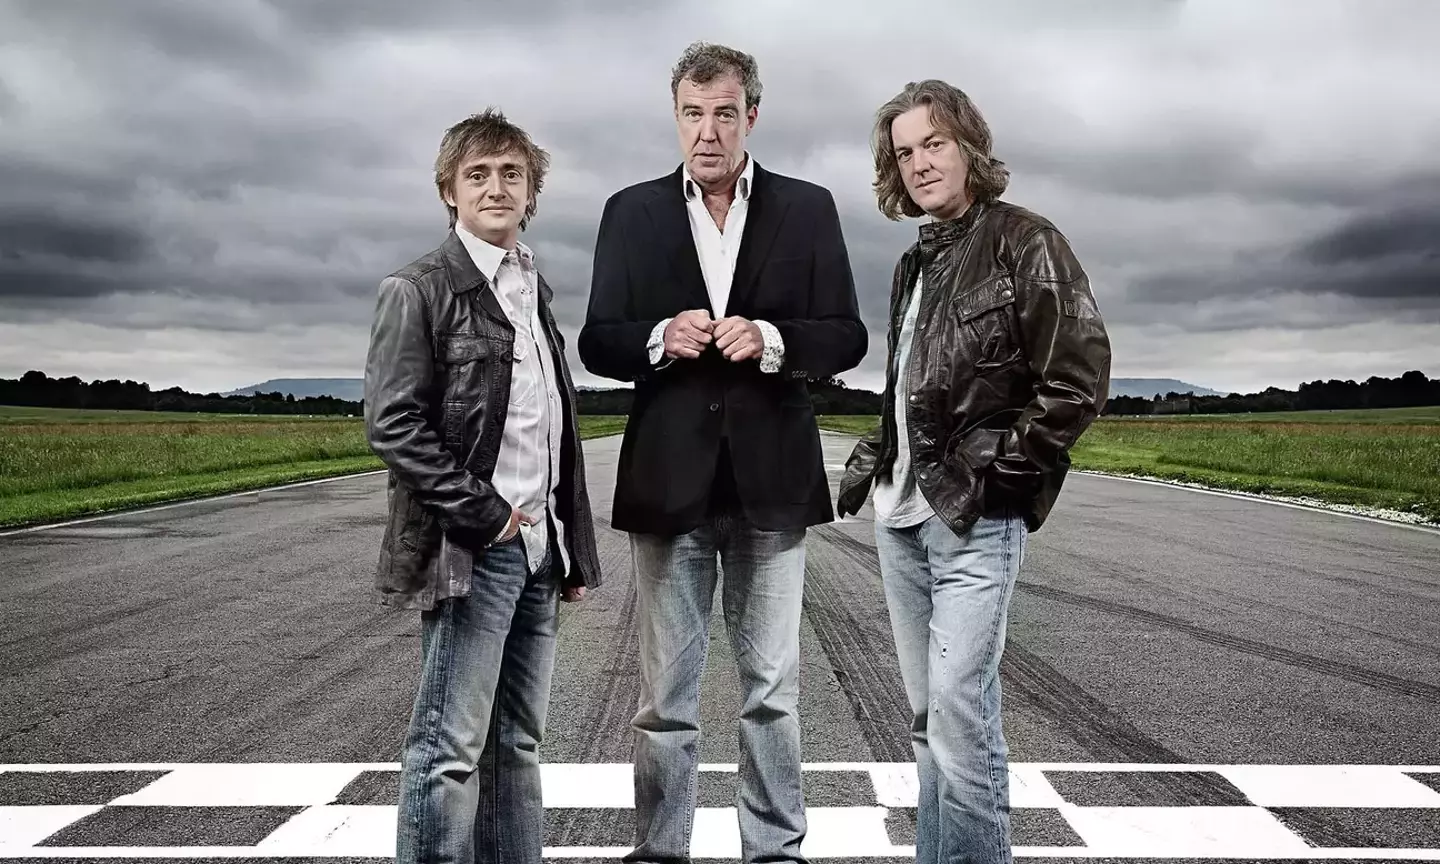 The infamous crash happened whilst Hammond was filming Top Gear.